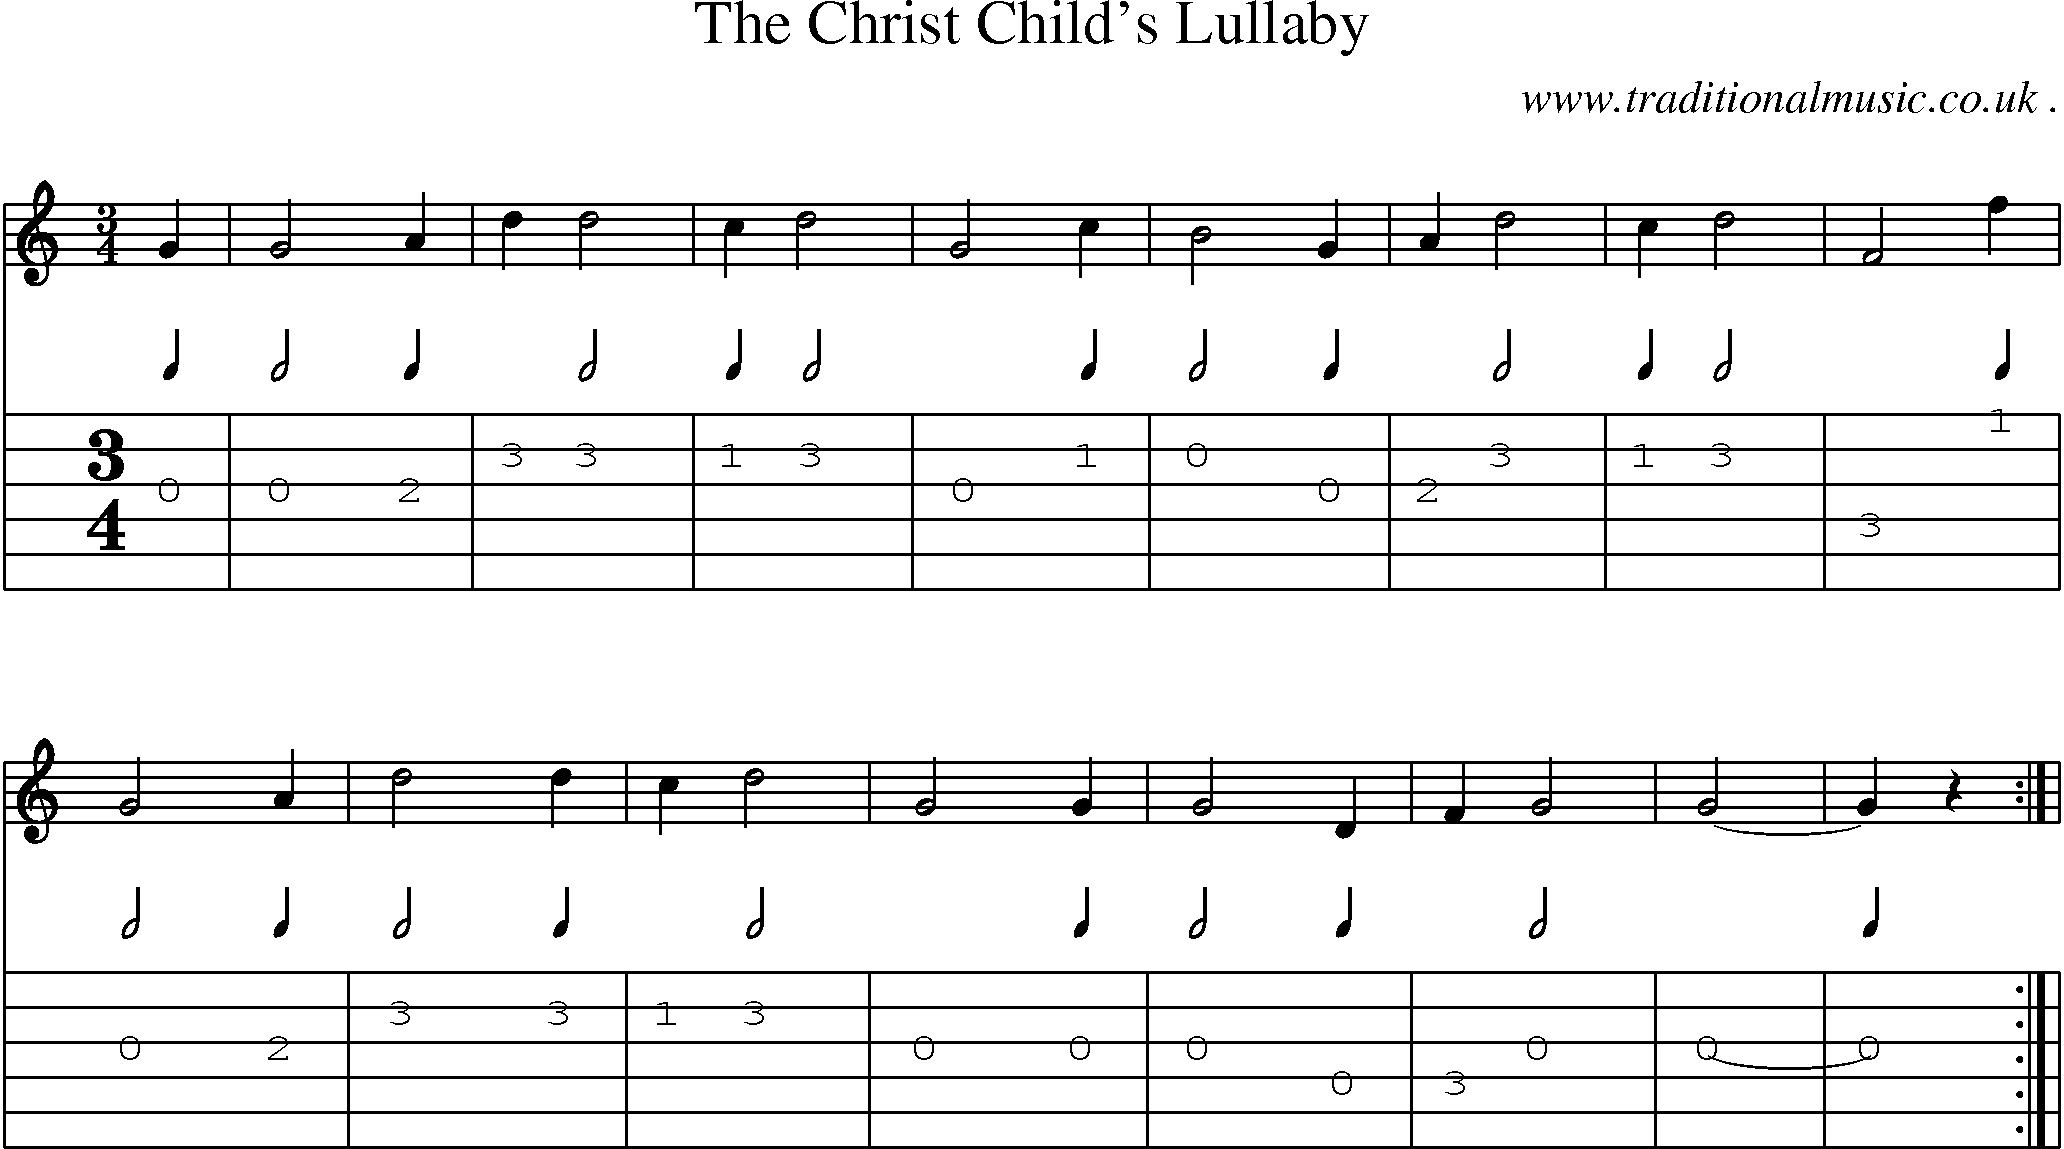 Sheet-Music and Guitar Tabs for The Christ Childs Lullaby